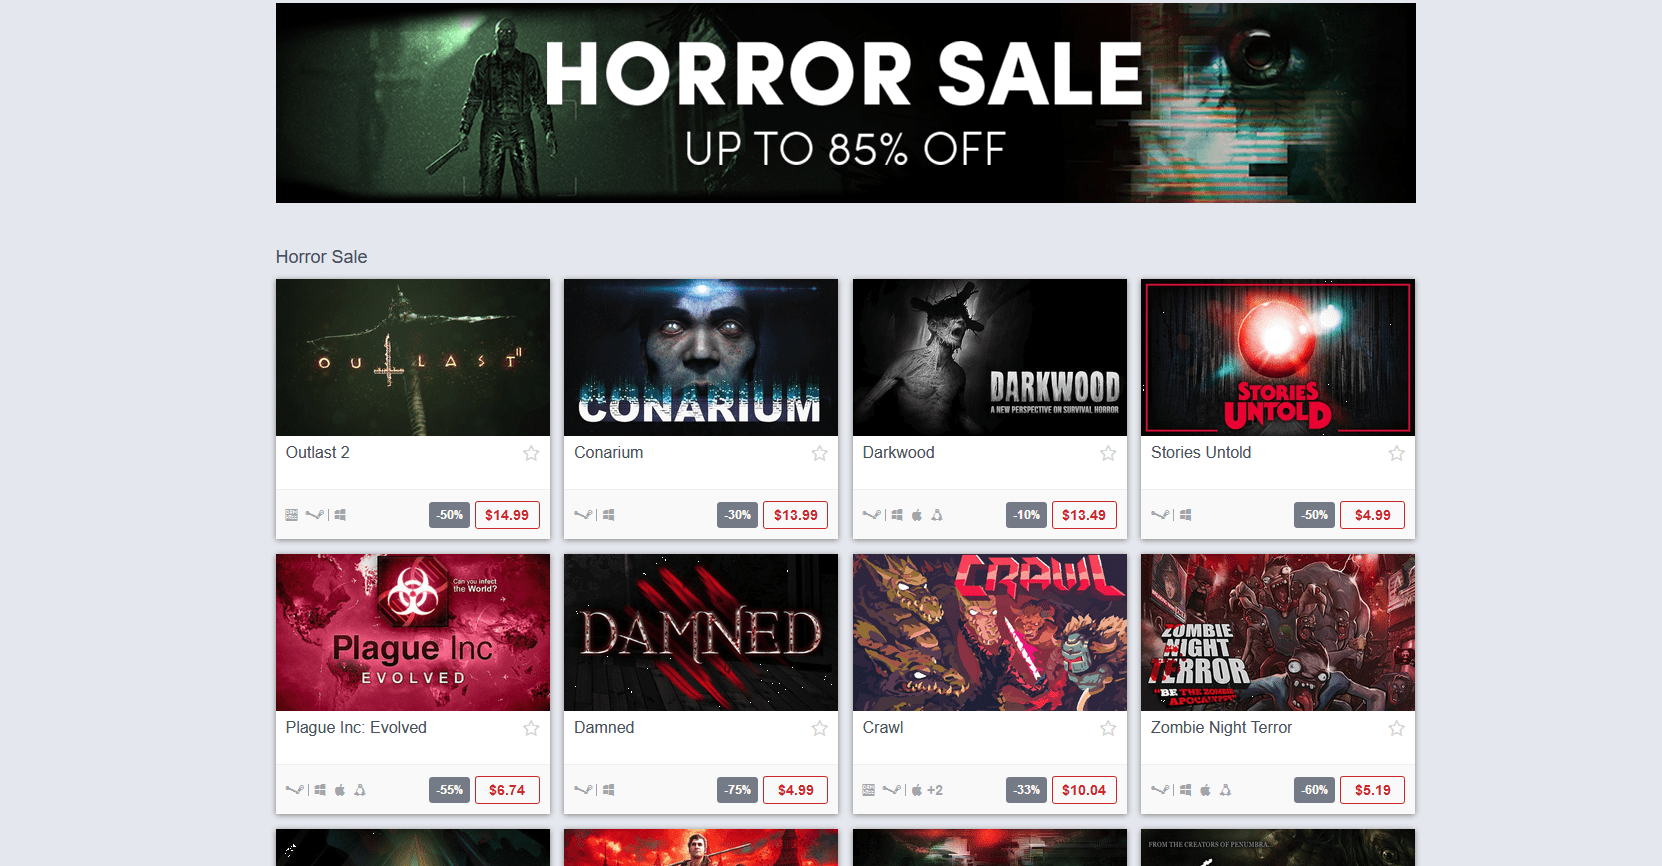 Humble Bundle Horror Sale is Running Right Now